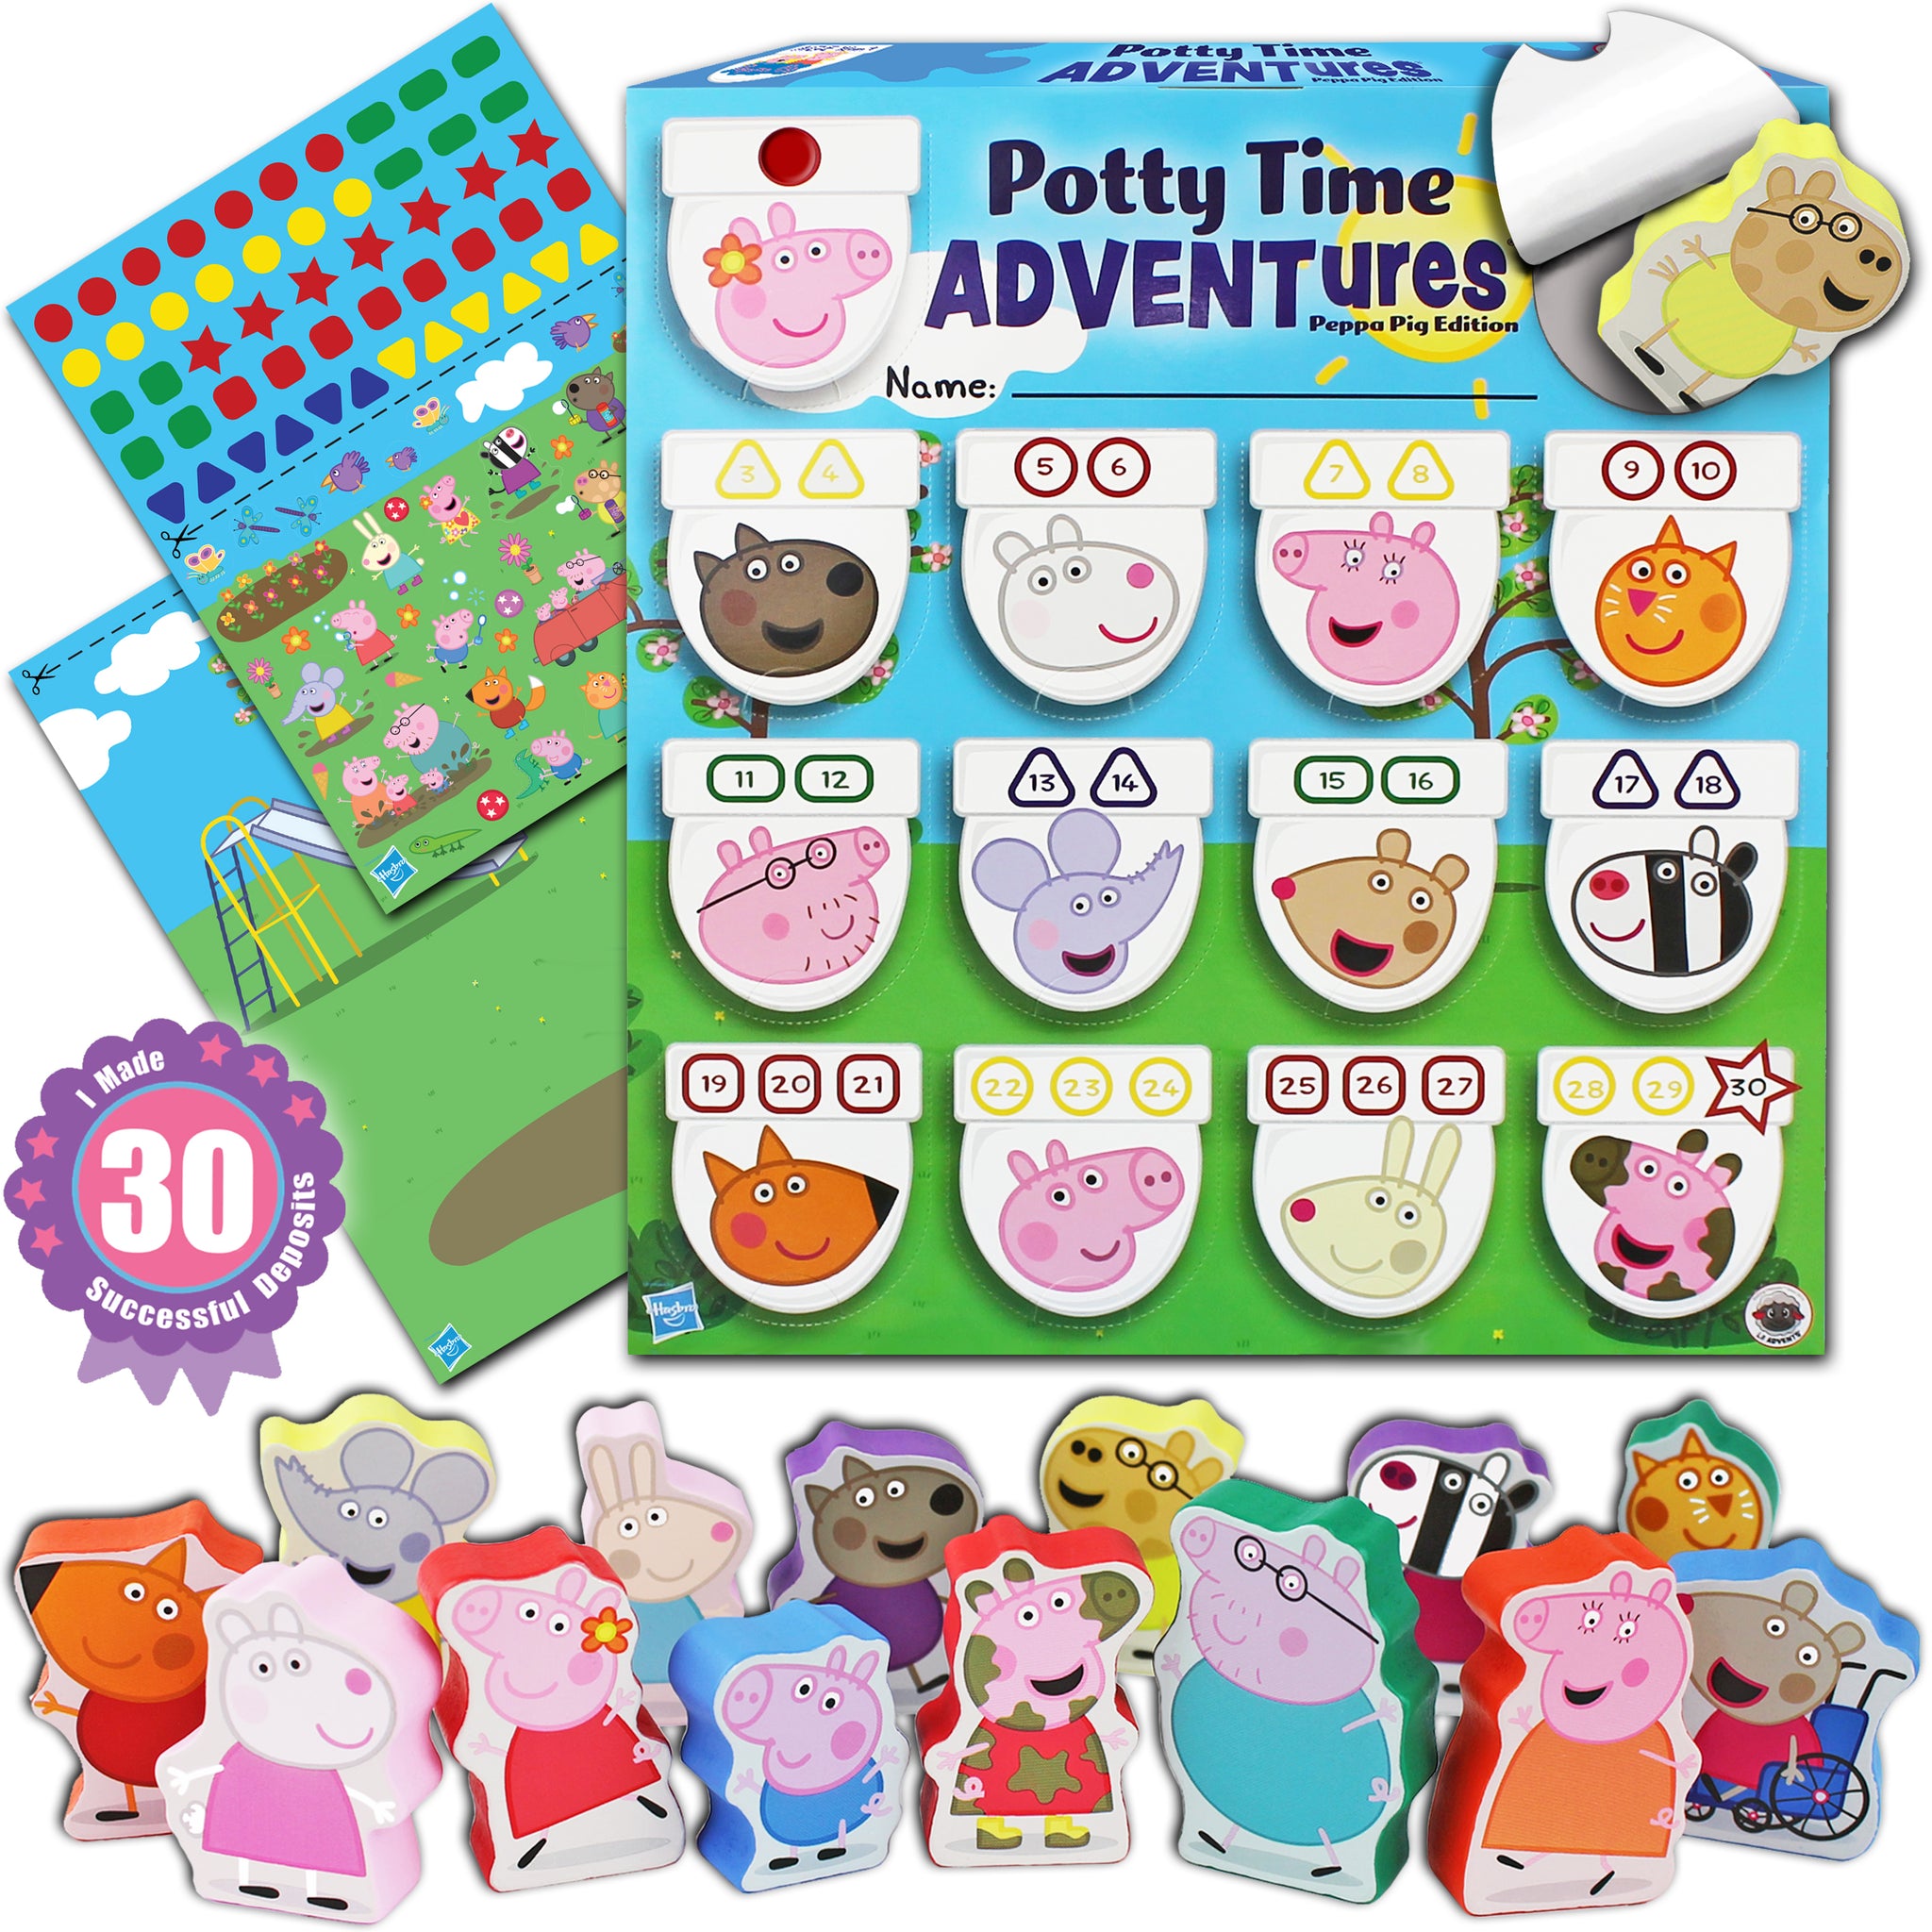 Potty Time ADVENTures - Peppa Pig